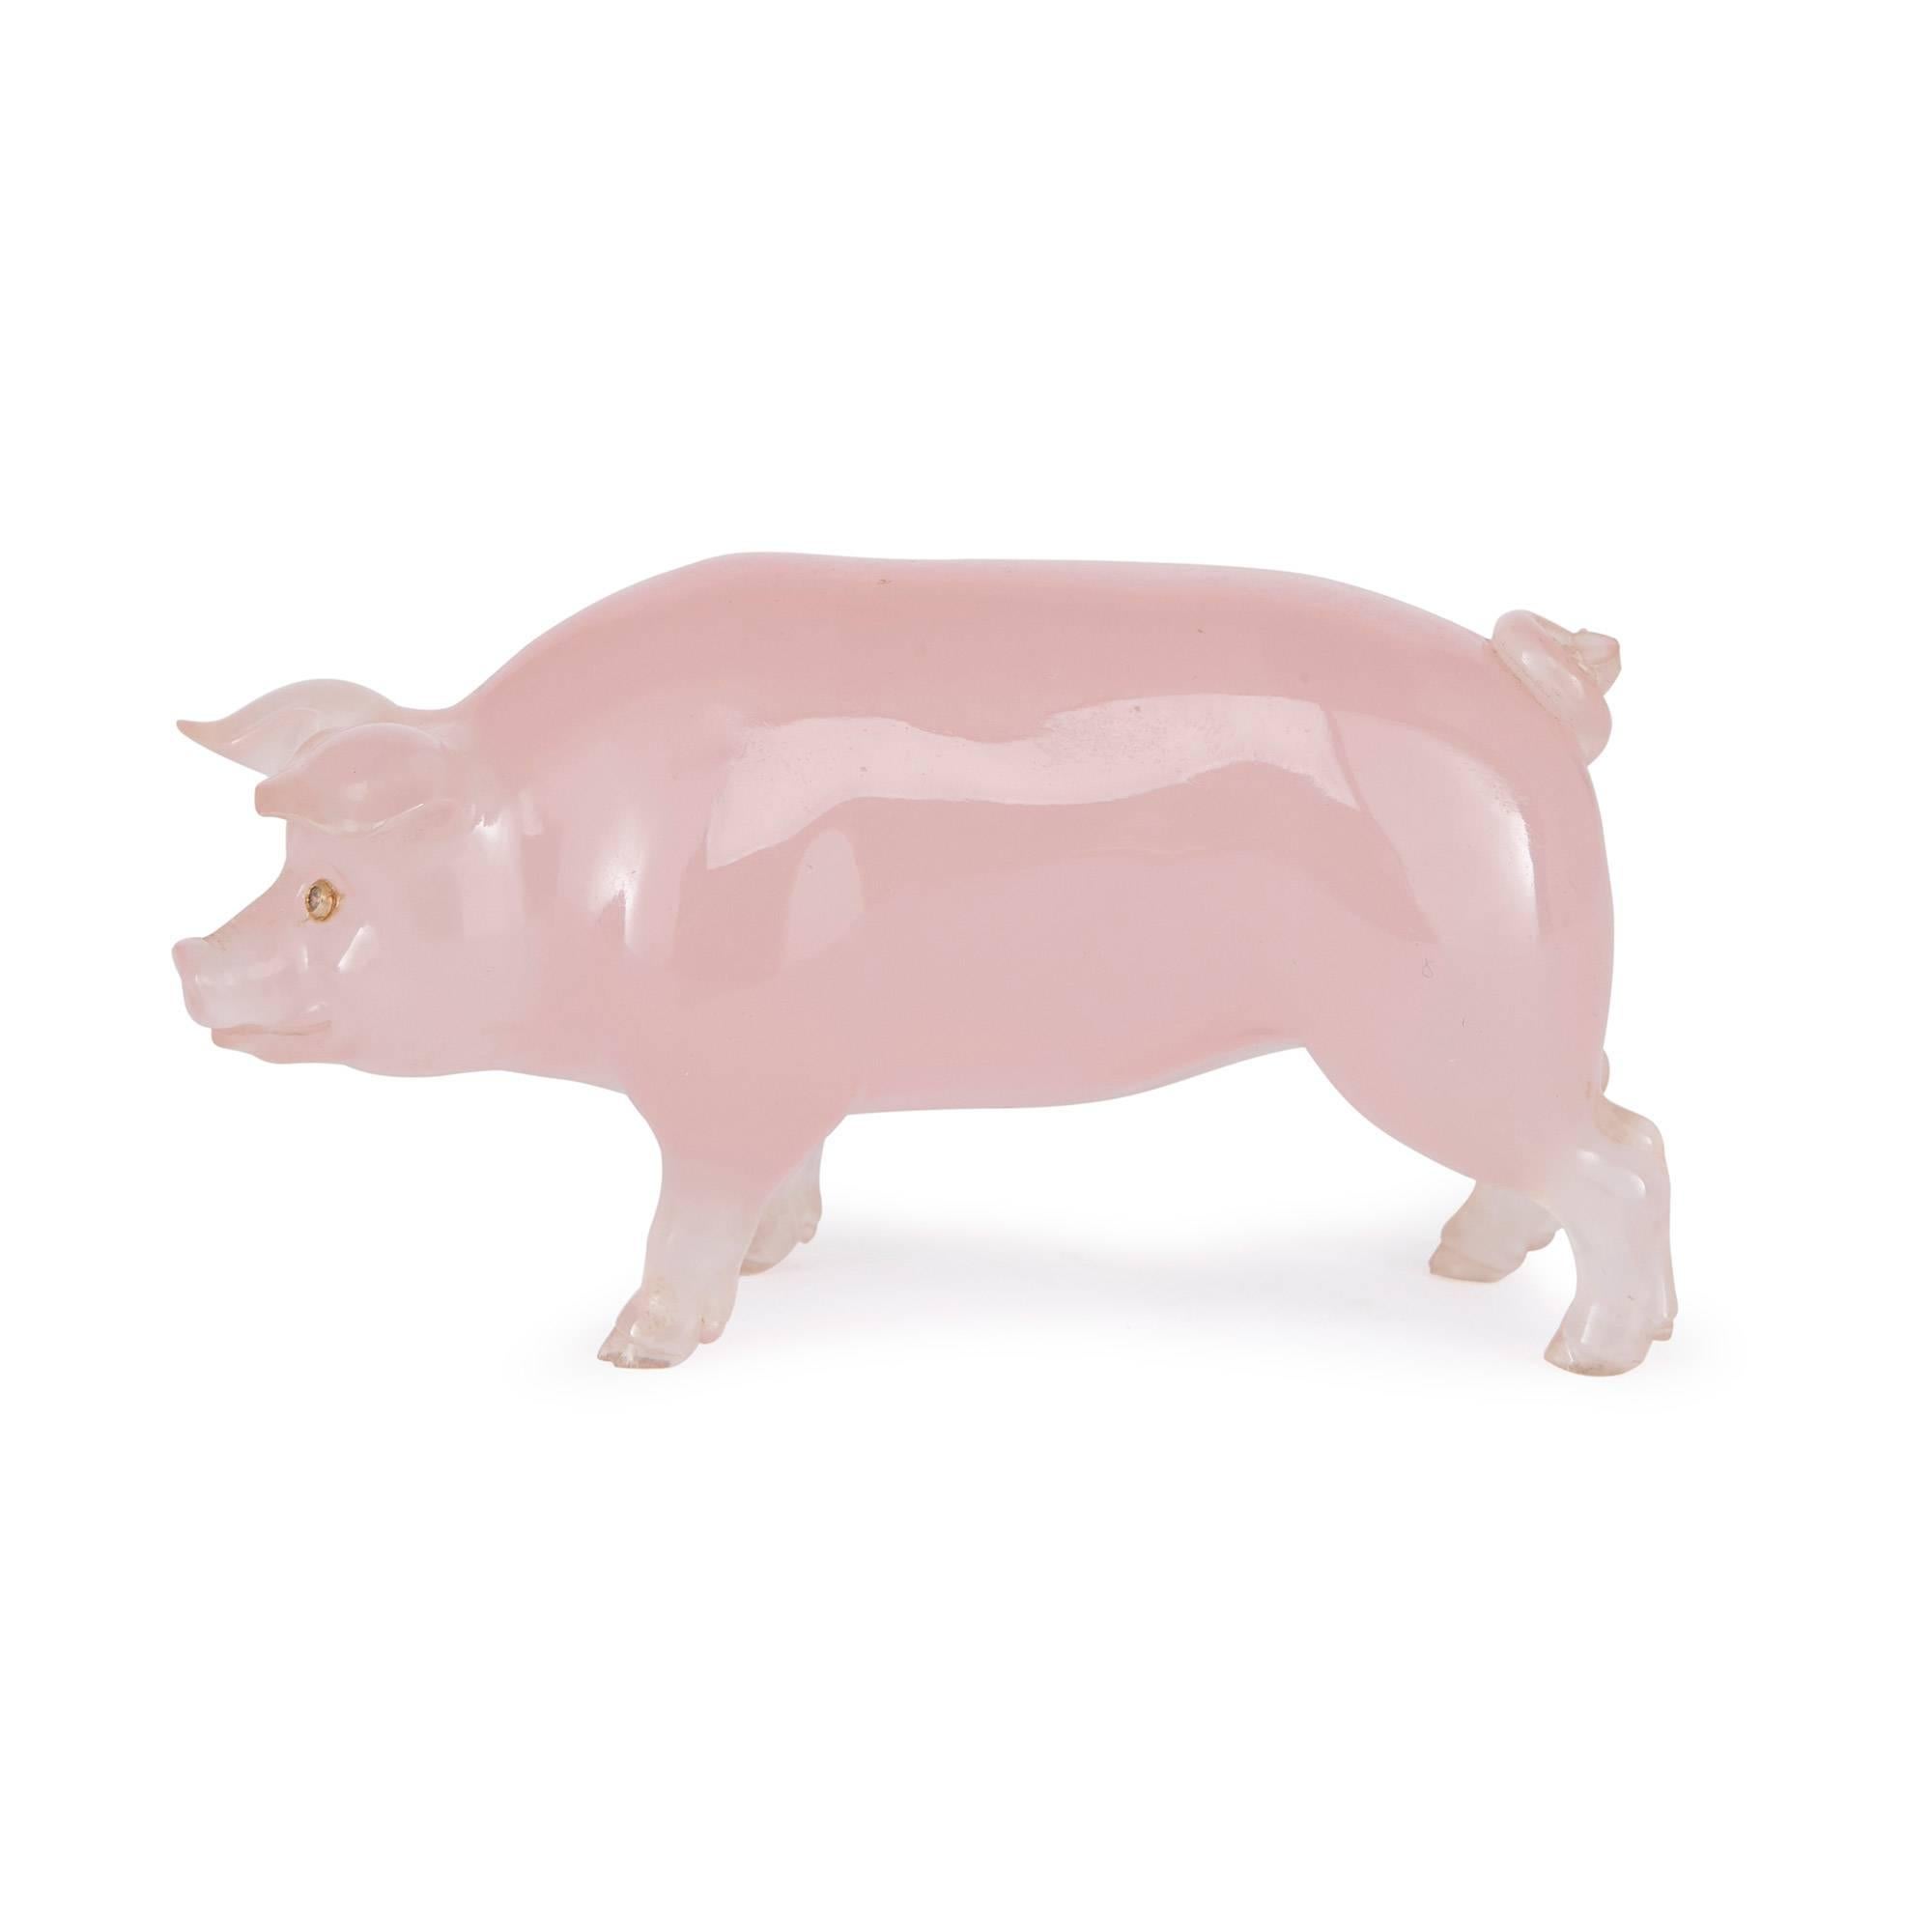 This realistic pig has been carved in rosequartz, set with diamond eyes.

The House of Fabergé was founded in St. Petersburg in 1842, under the ownership of Gustav Fabergé (1814-1893). His son, Peter Carl Fabergé (1846-1920), assumed control of the